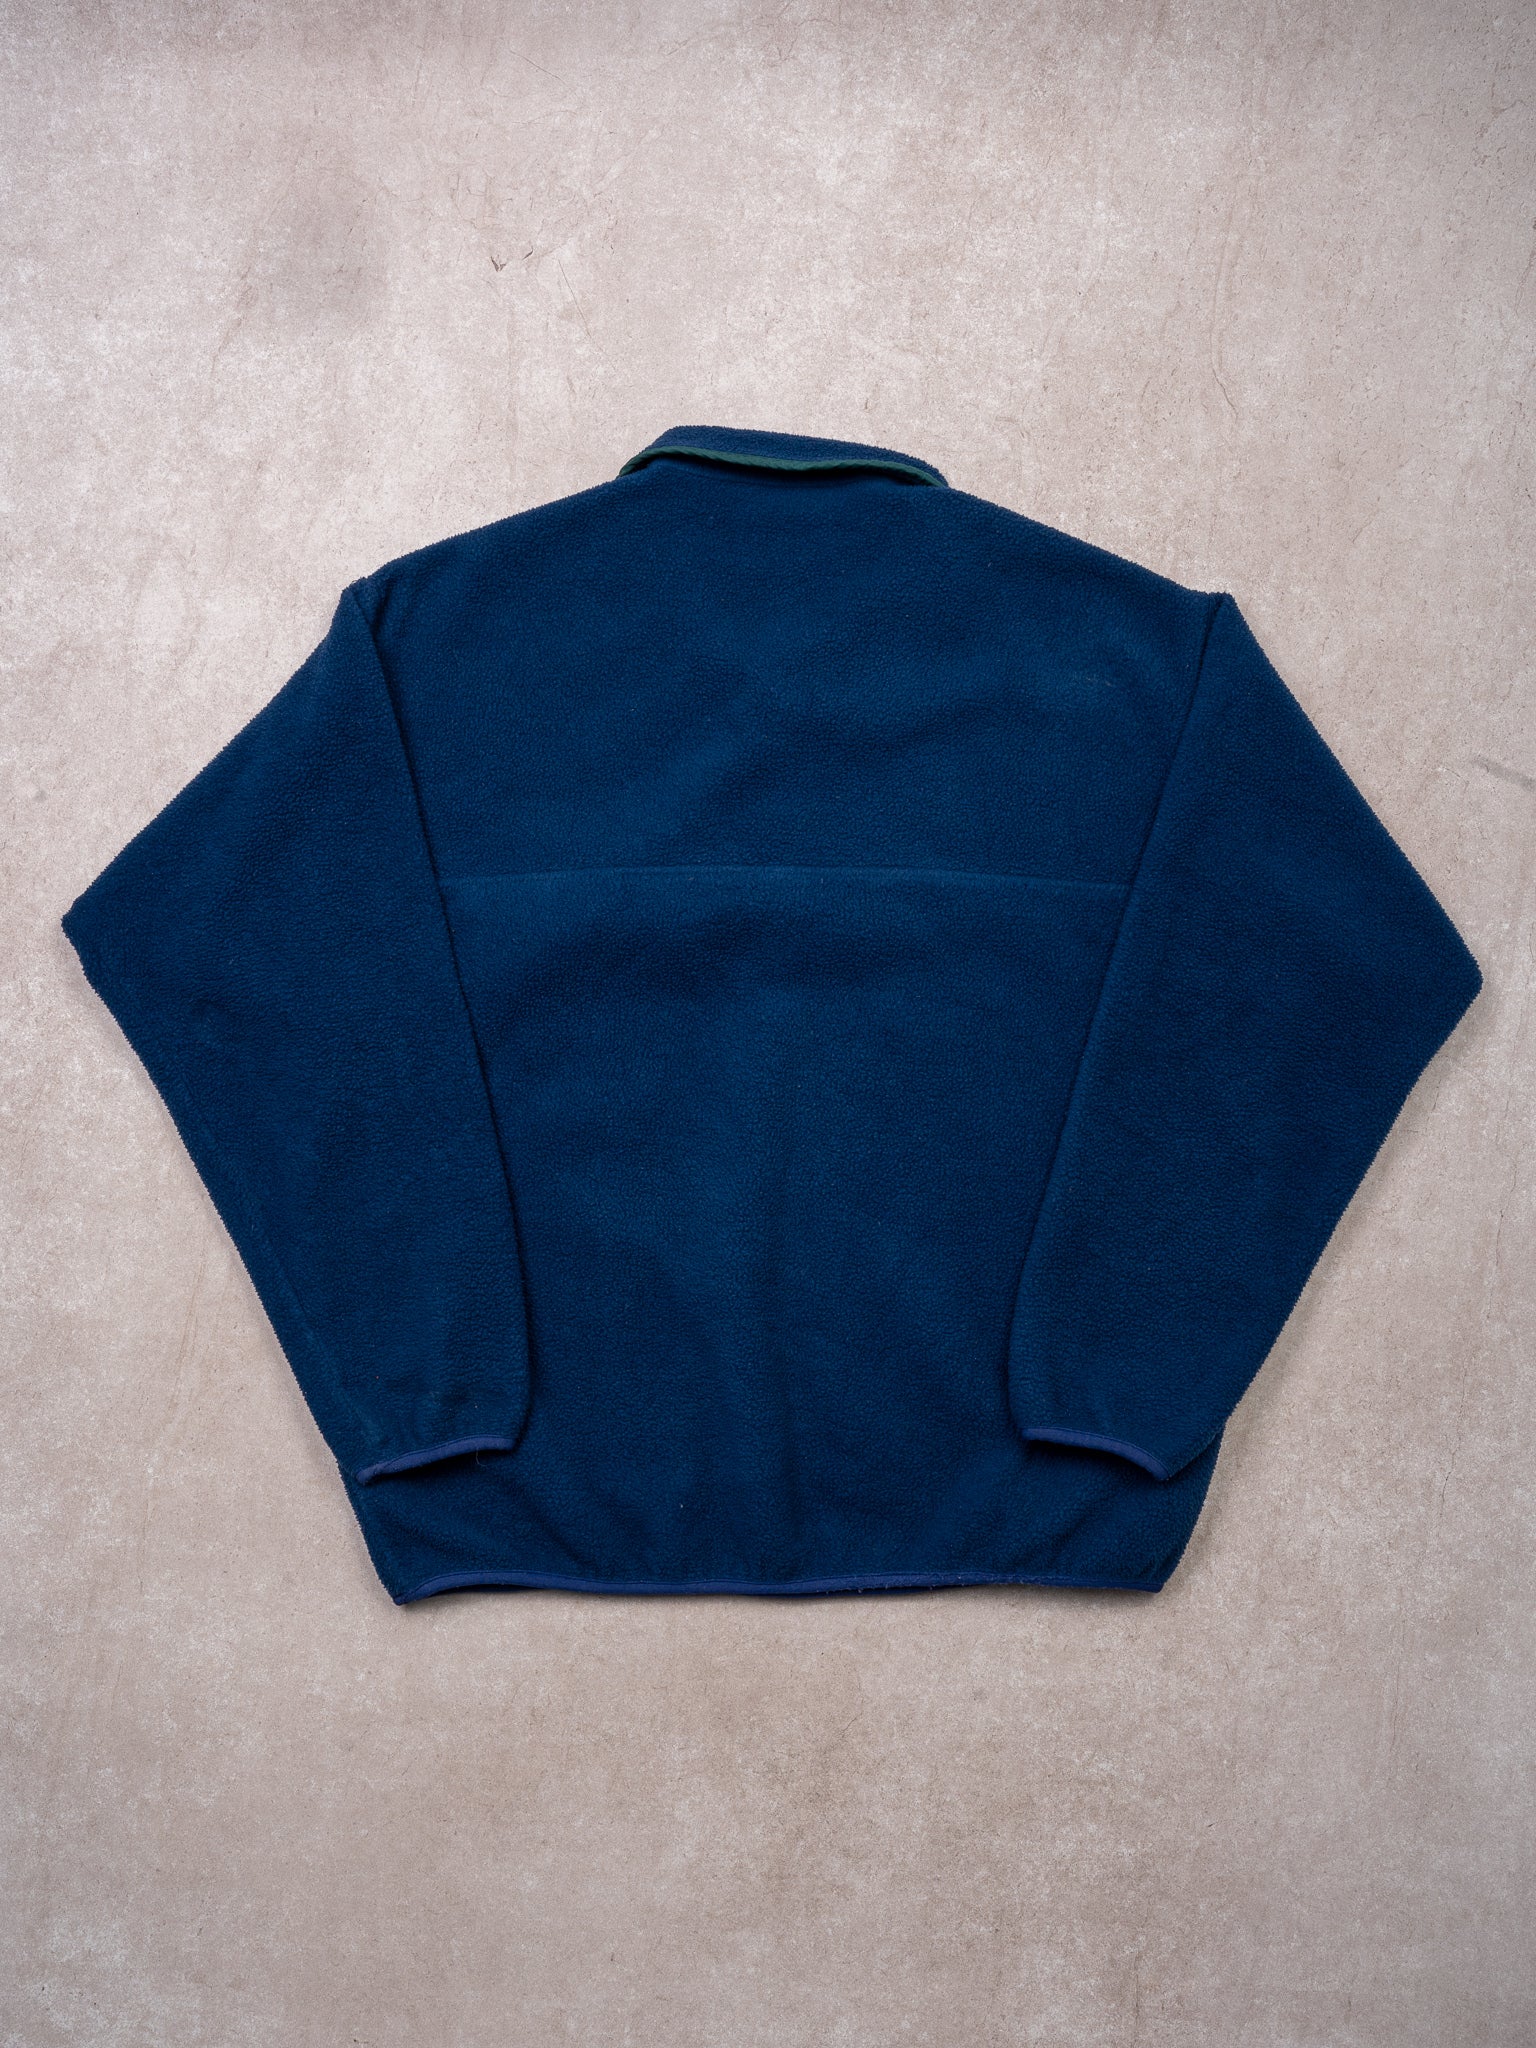 Vintage 90s Blue + Green Patagonia 1/4 Button Fleece Sweater (L)